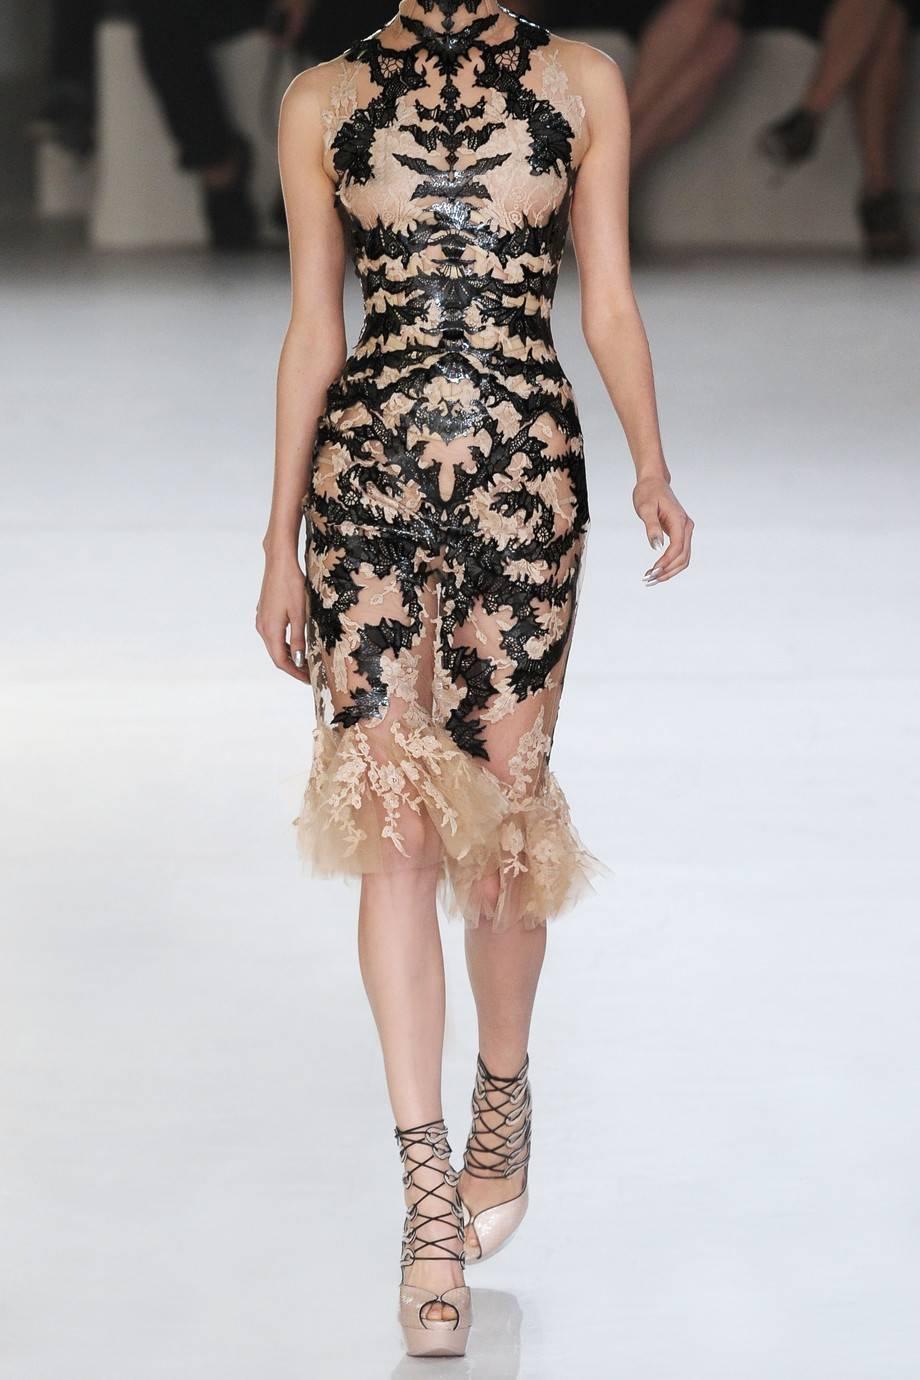 ALEXANDER MCQUEEN Laser-cut patent-leather and lace dress.

Antique-rose lace
Black laser cut patent-leather appliqués, fully lined
Concealed zip and hook fastening at back
72% cotton, 28% polyamide; lining: 100% silk

IT size 40 - US 6

Pristibe